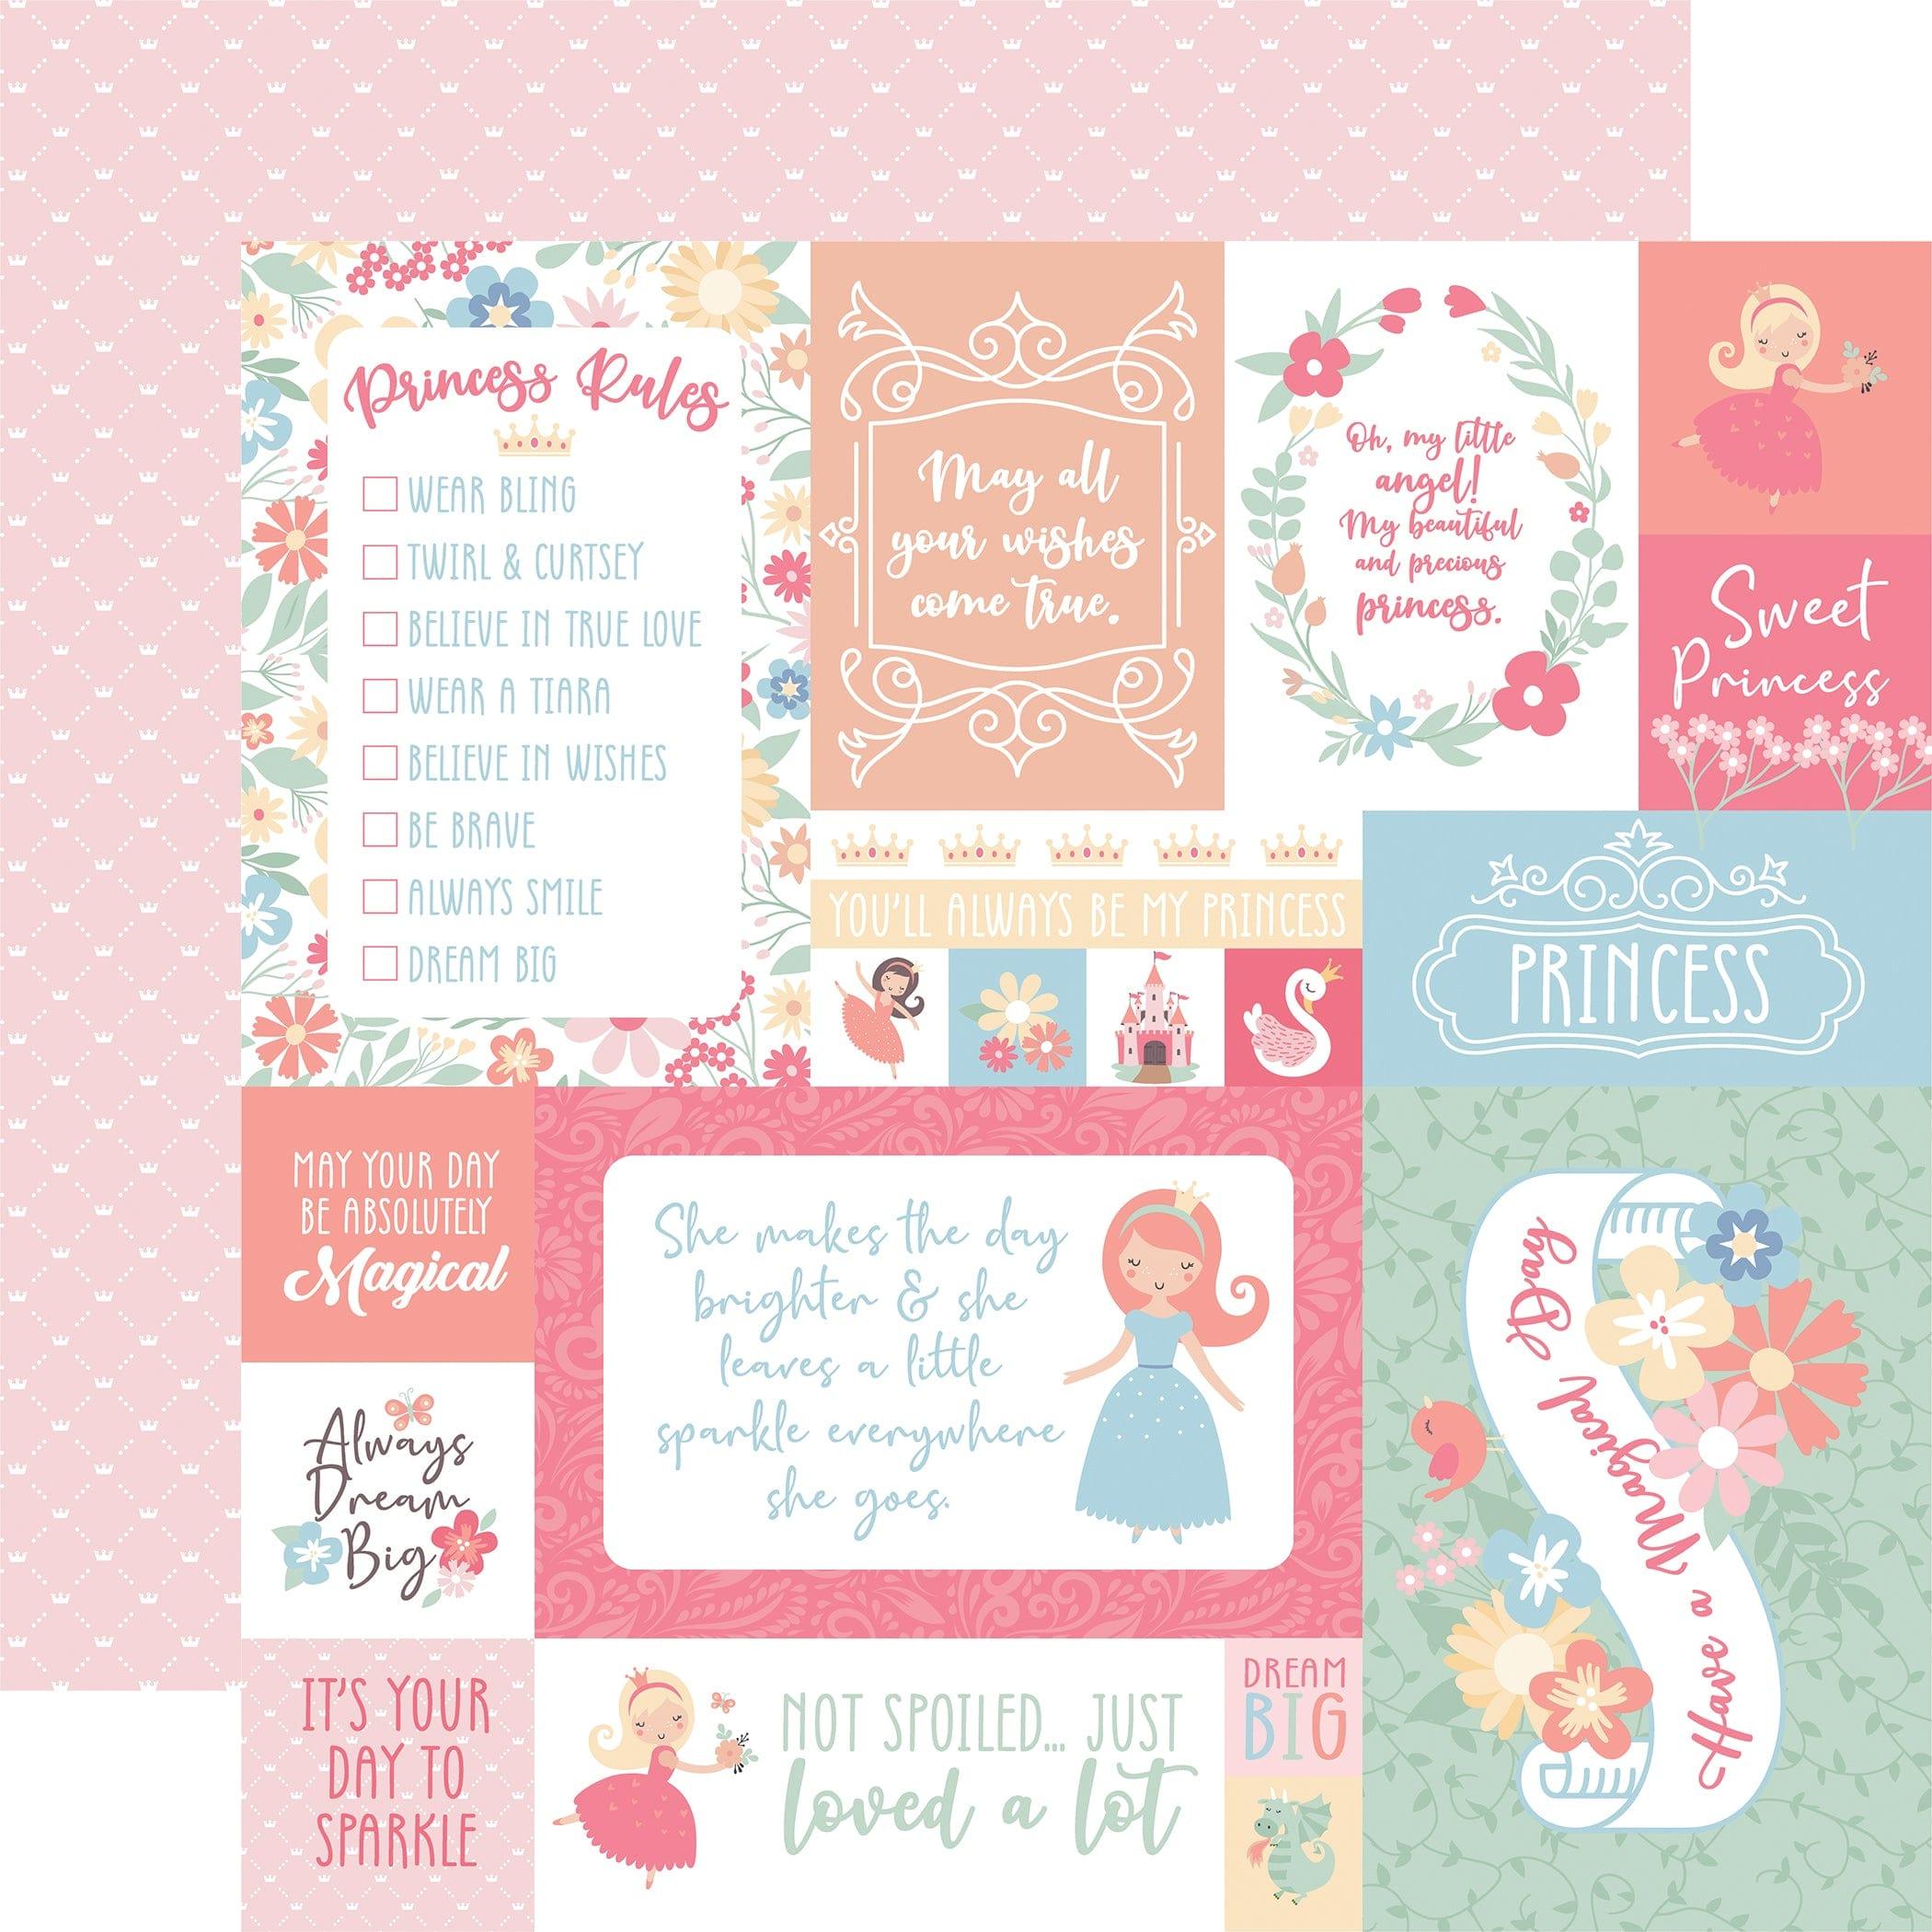 Our Little Princess Collection 12 x 12 Scrapbook Page Kit by Echo Park Paper - Scrapbook Supply Companies